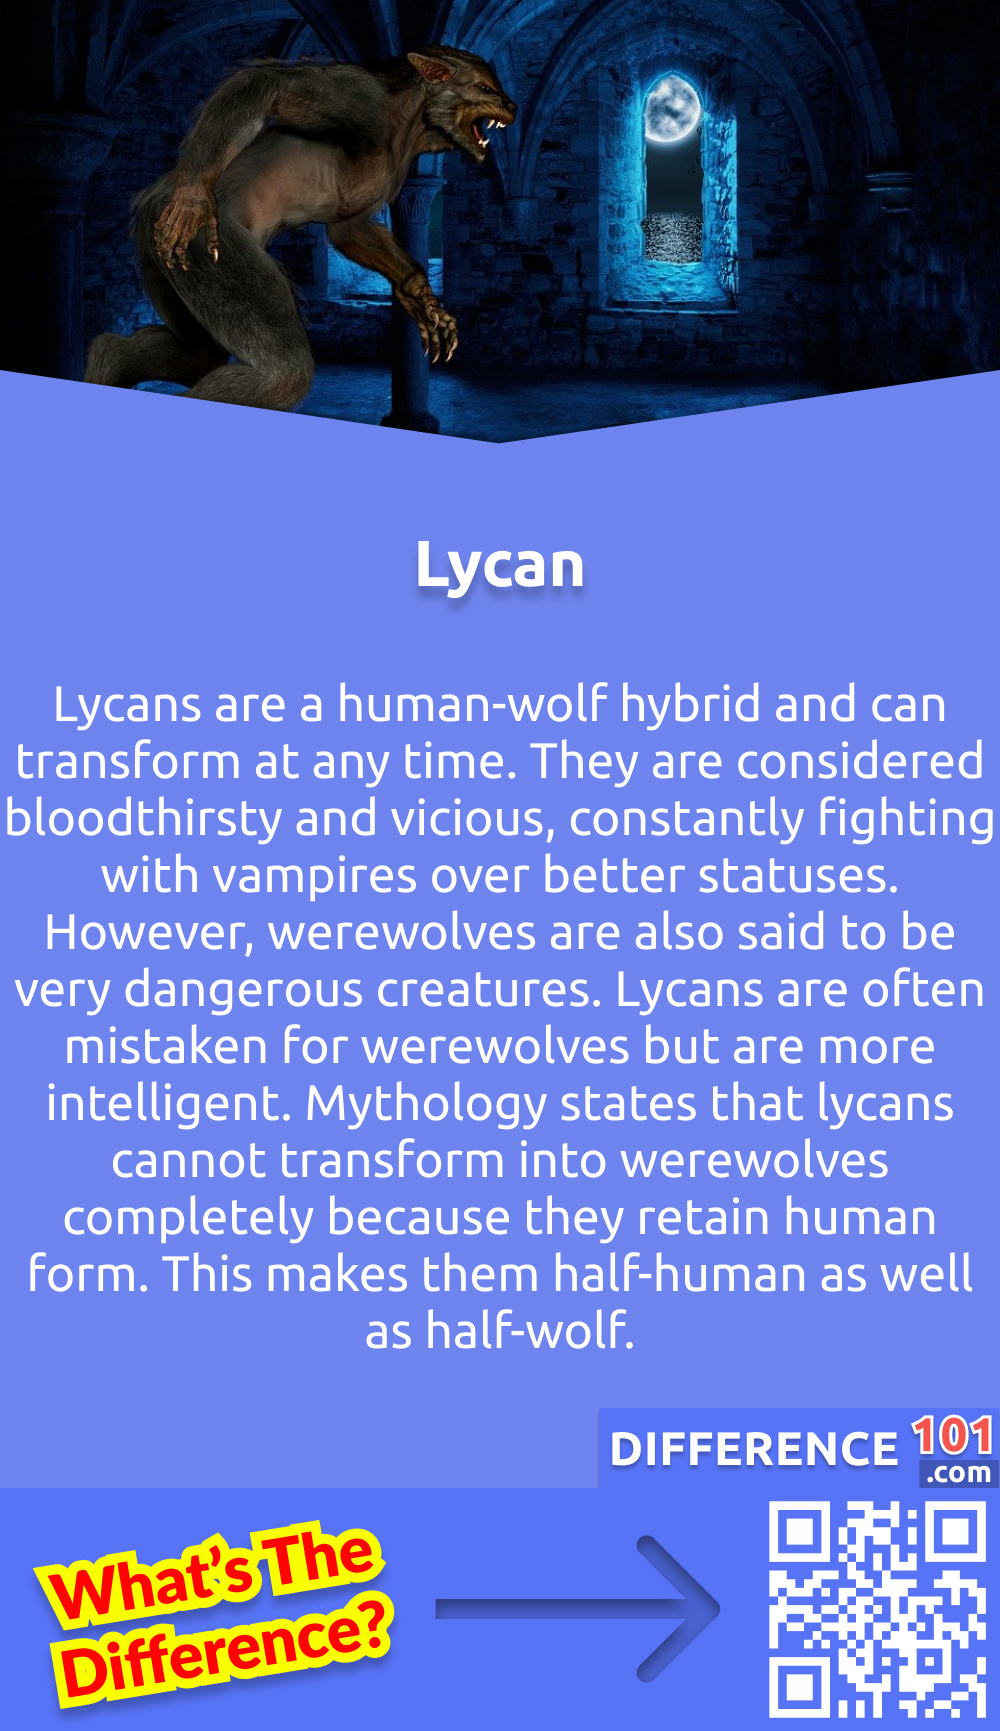 Werewolf vs. Lycan: 10 Key Differences, Description, Types | Difference 101